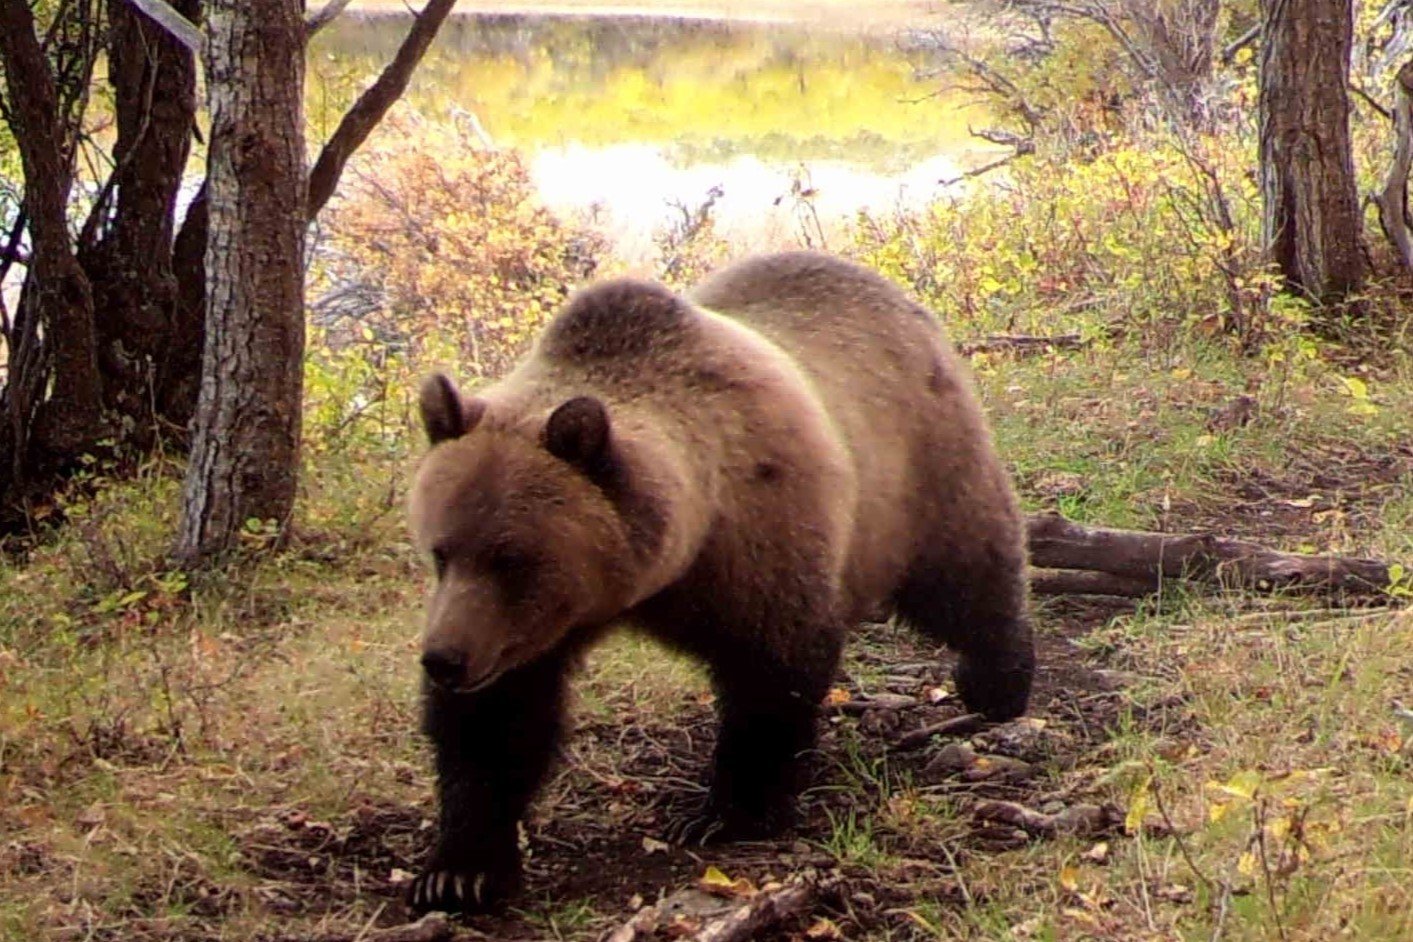 Grizzly bear walking through woods